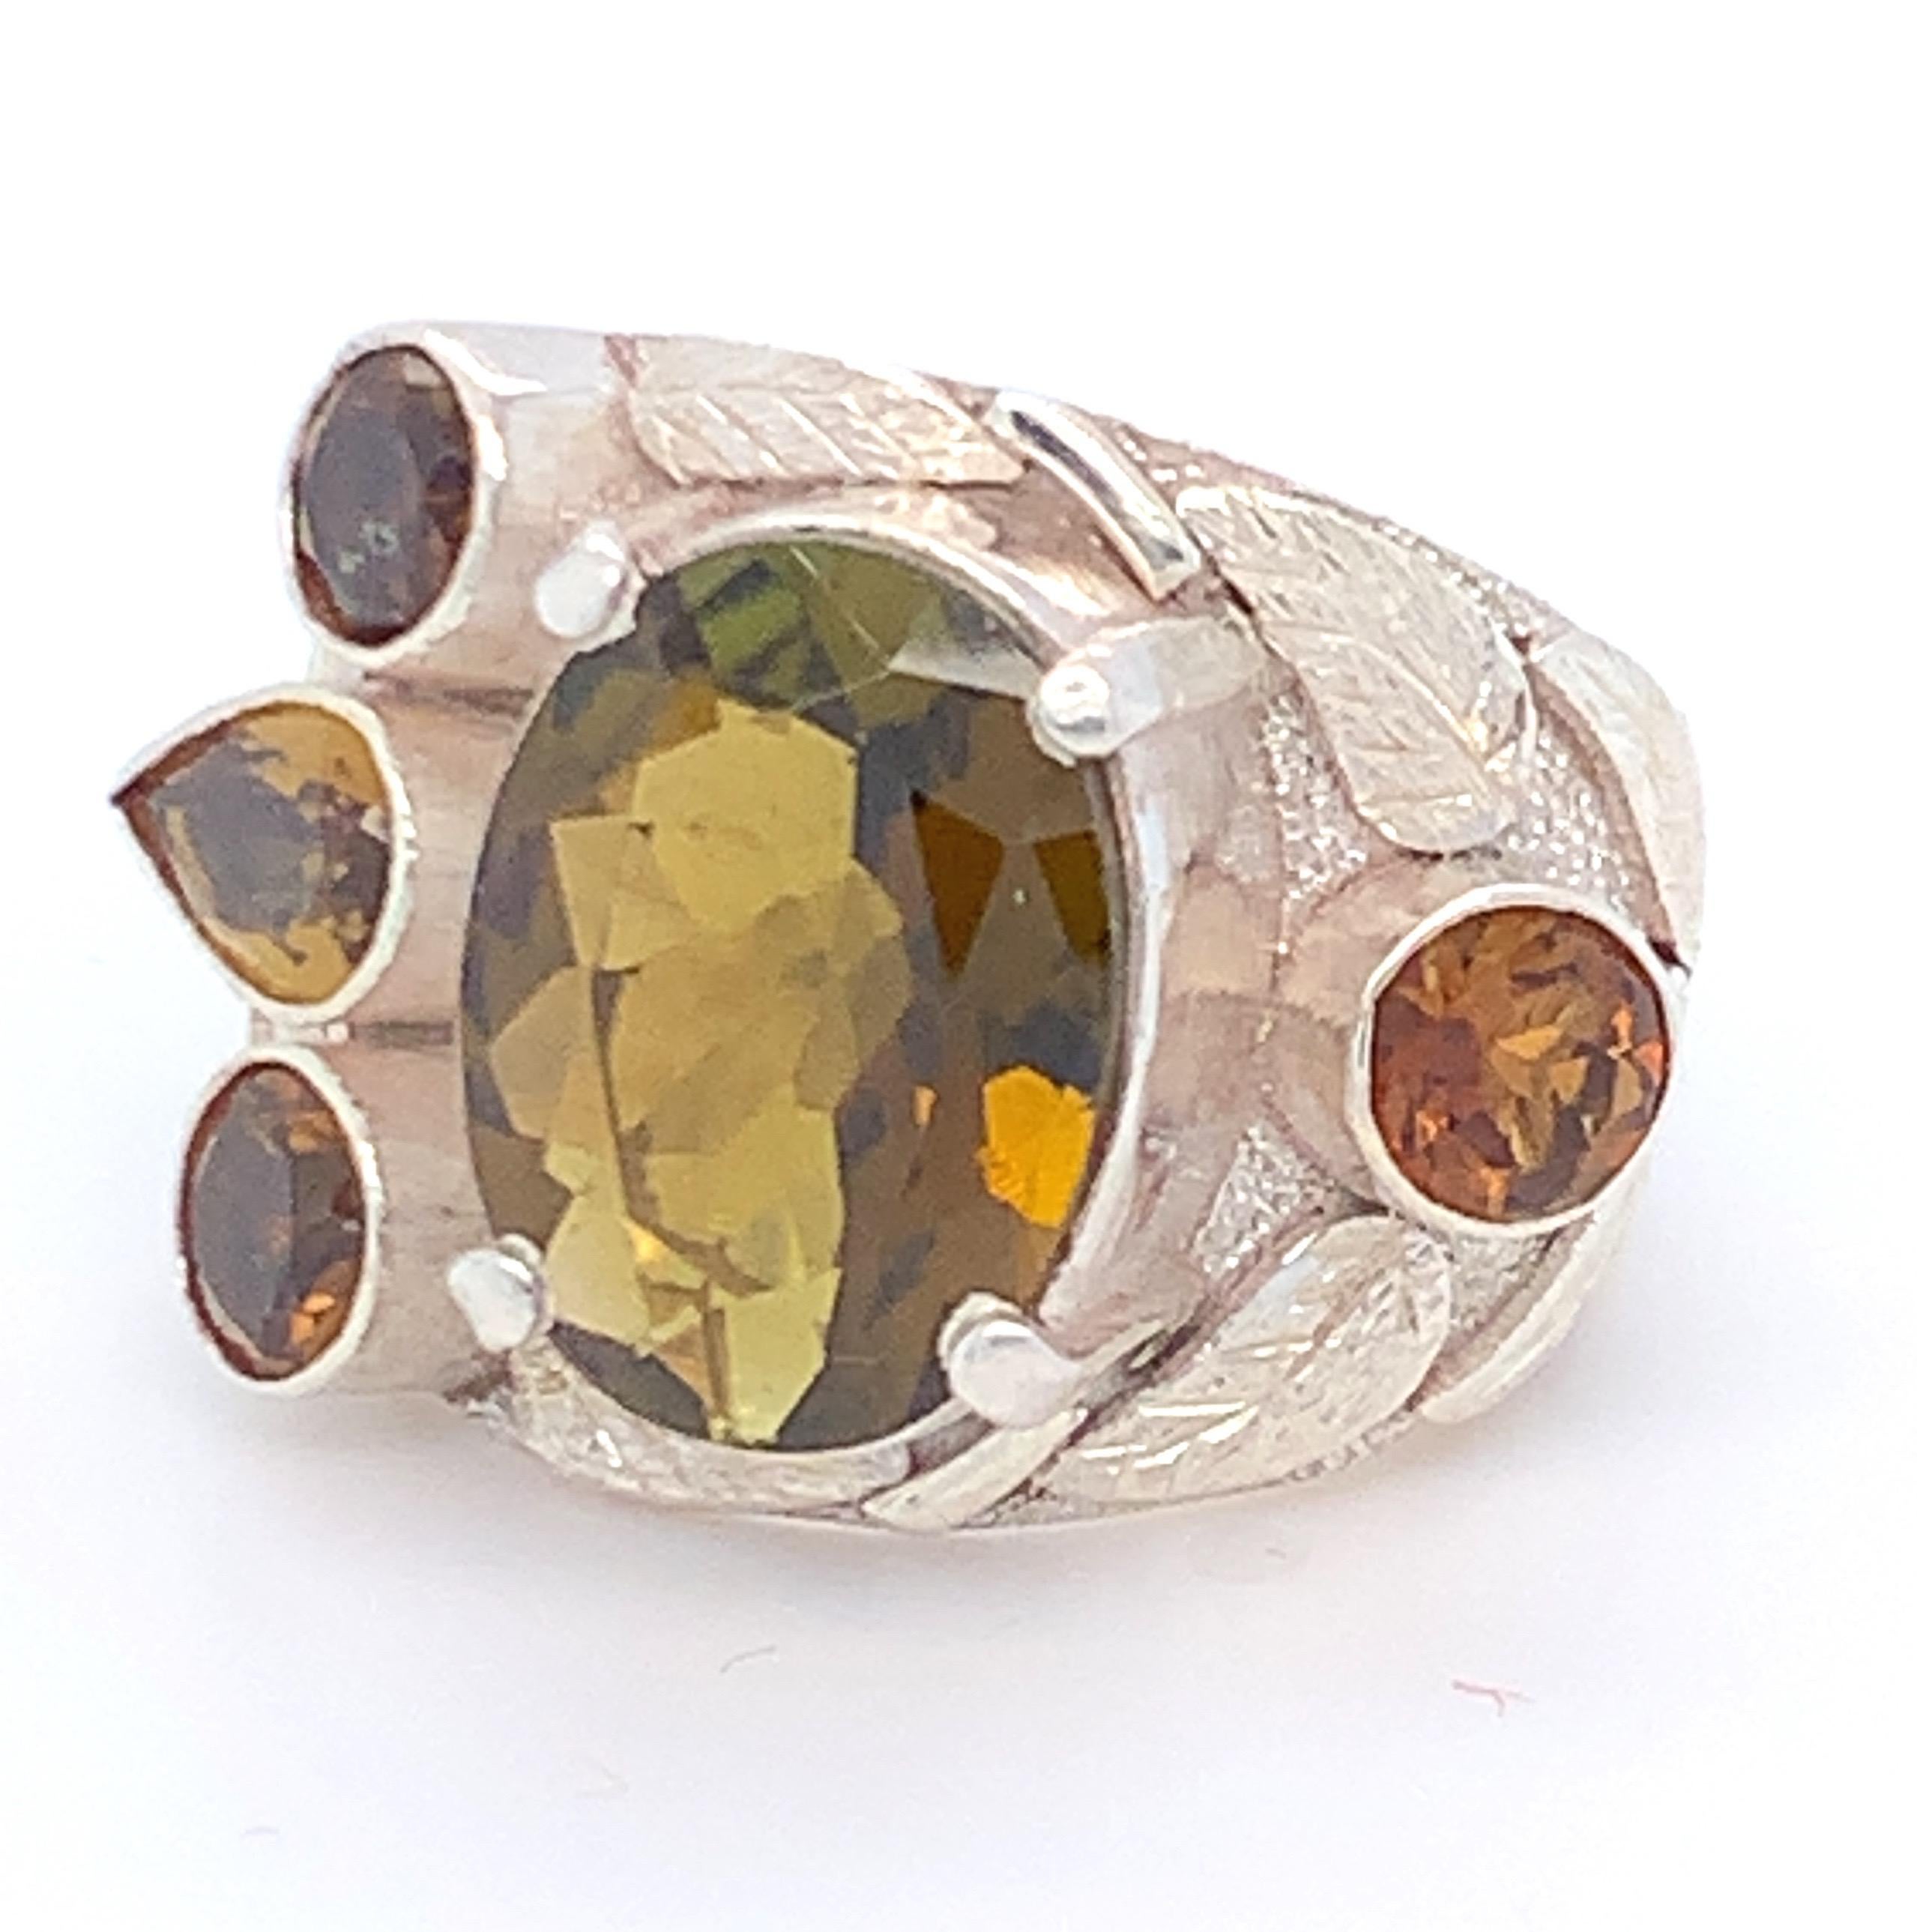 Oval greenish yellow Tourmaline is the main stone with other multi shaped tourmaline are set in asymmetric design. Multi-layer work on the sides enhances the beauty of this ring. Set in sterling silver and carefully crafted with hand makes it a one